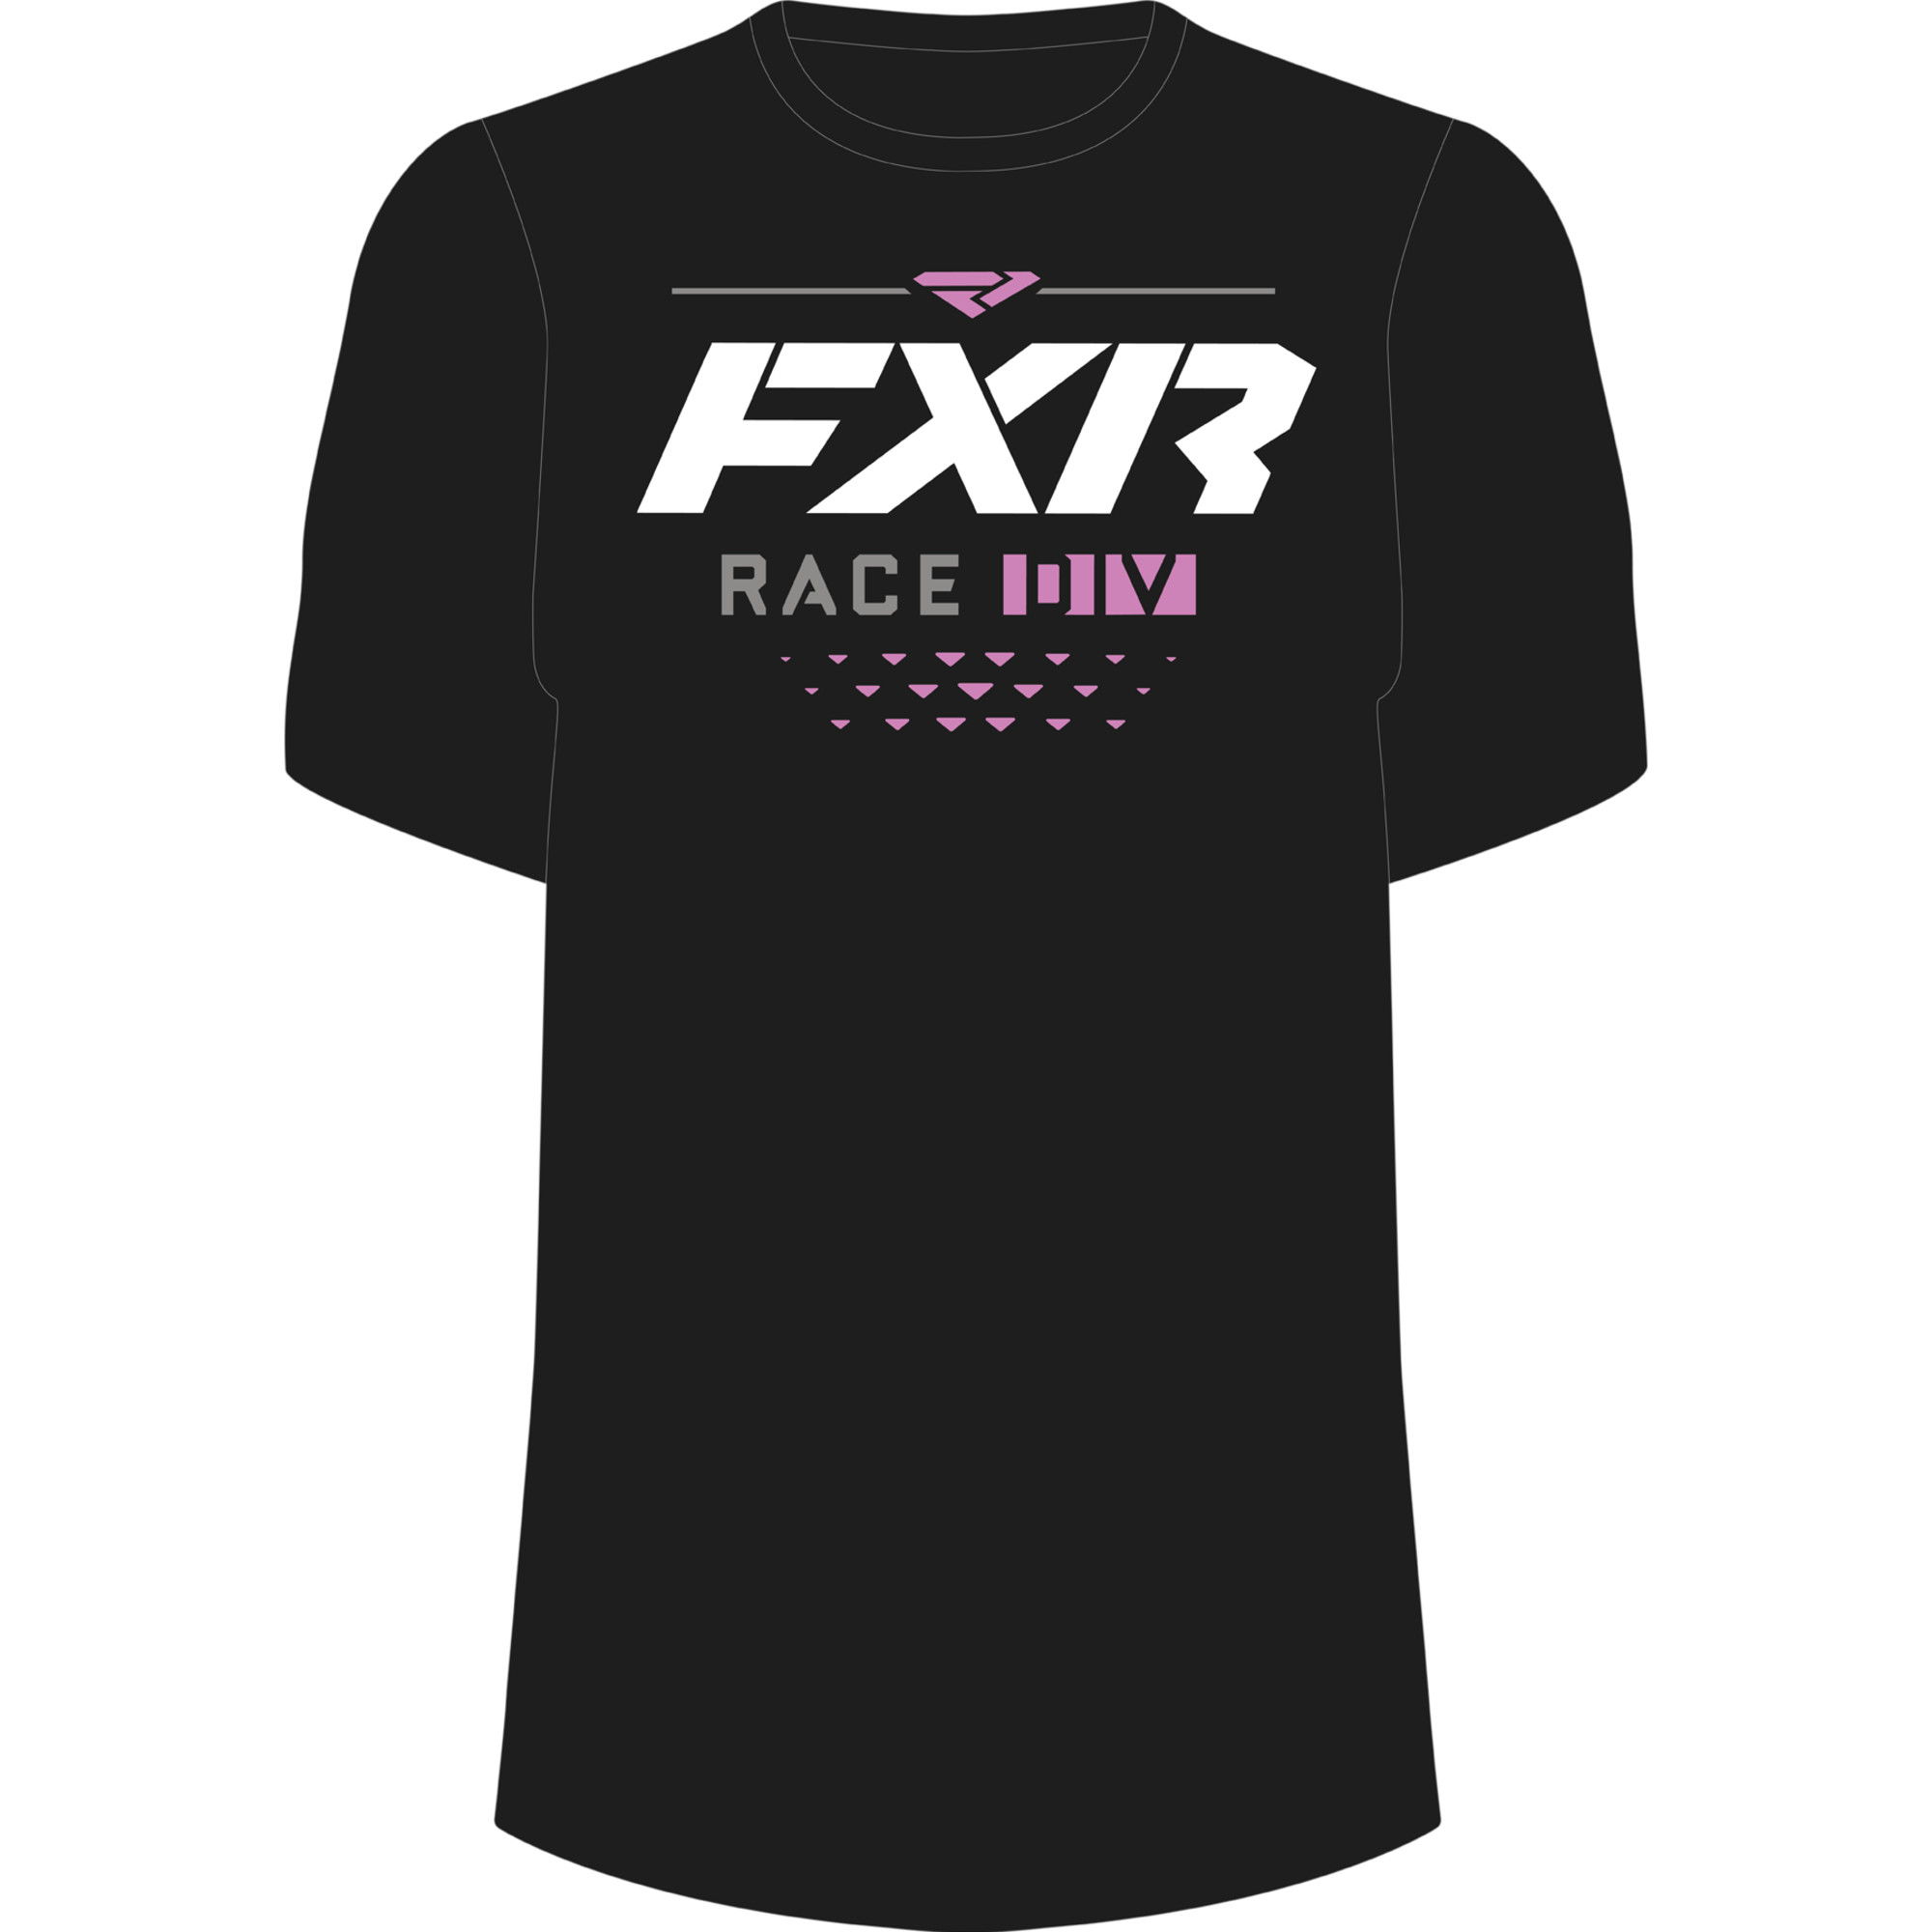 fxr racing t-shirt shirts for kids race division